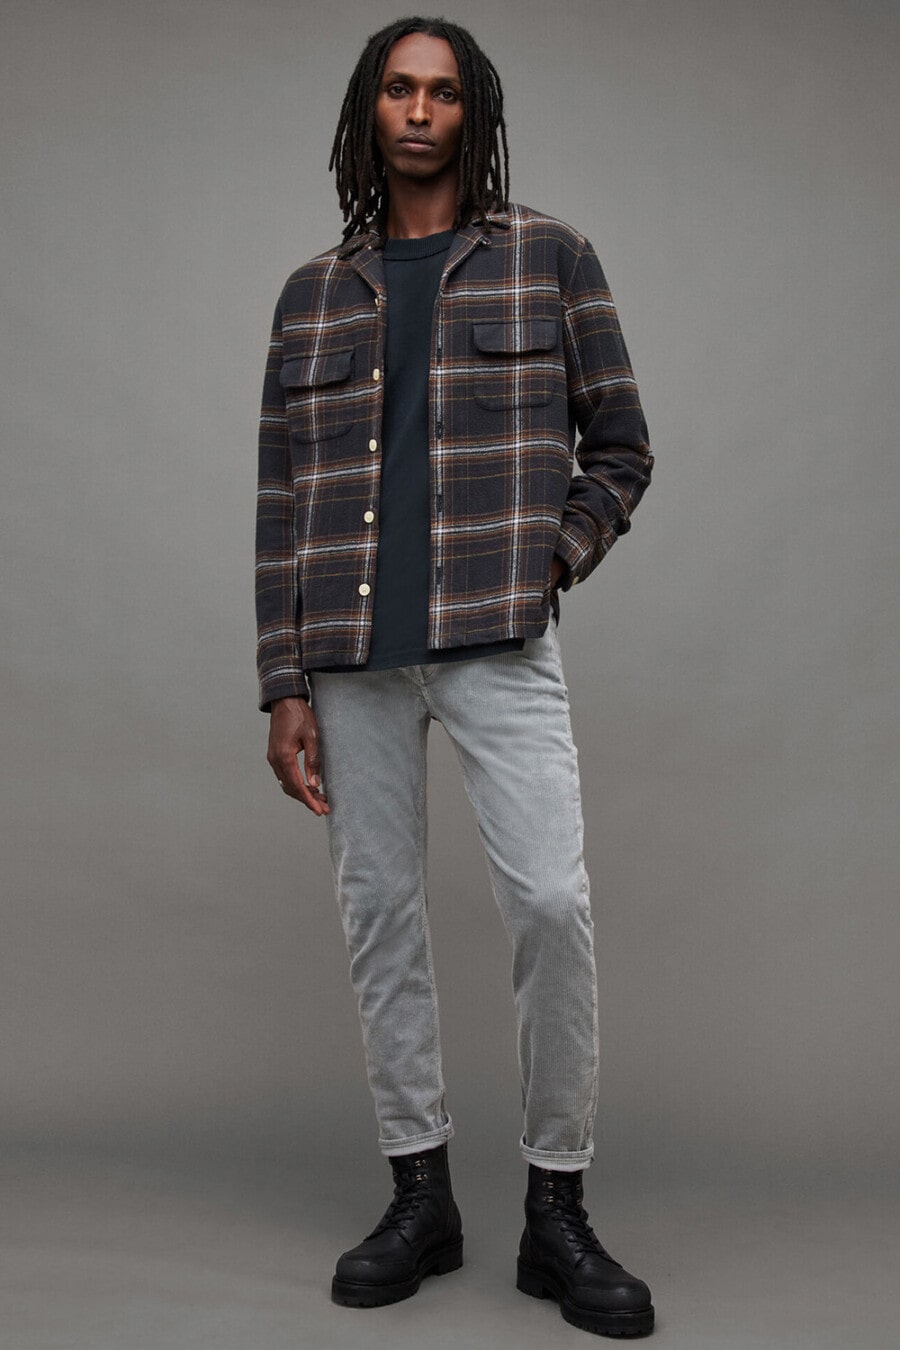 Men's grey jeans, black T-shirt, grey and red check flannel overshirt and black leather military boots outfit